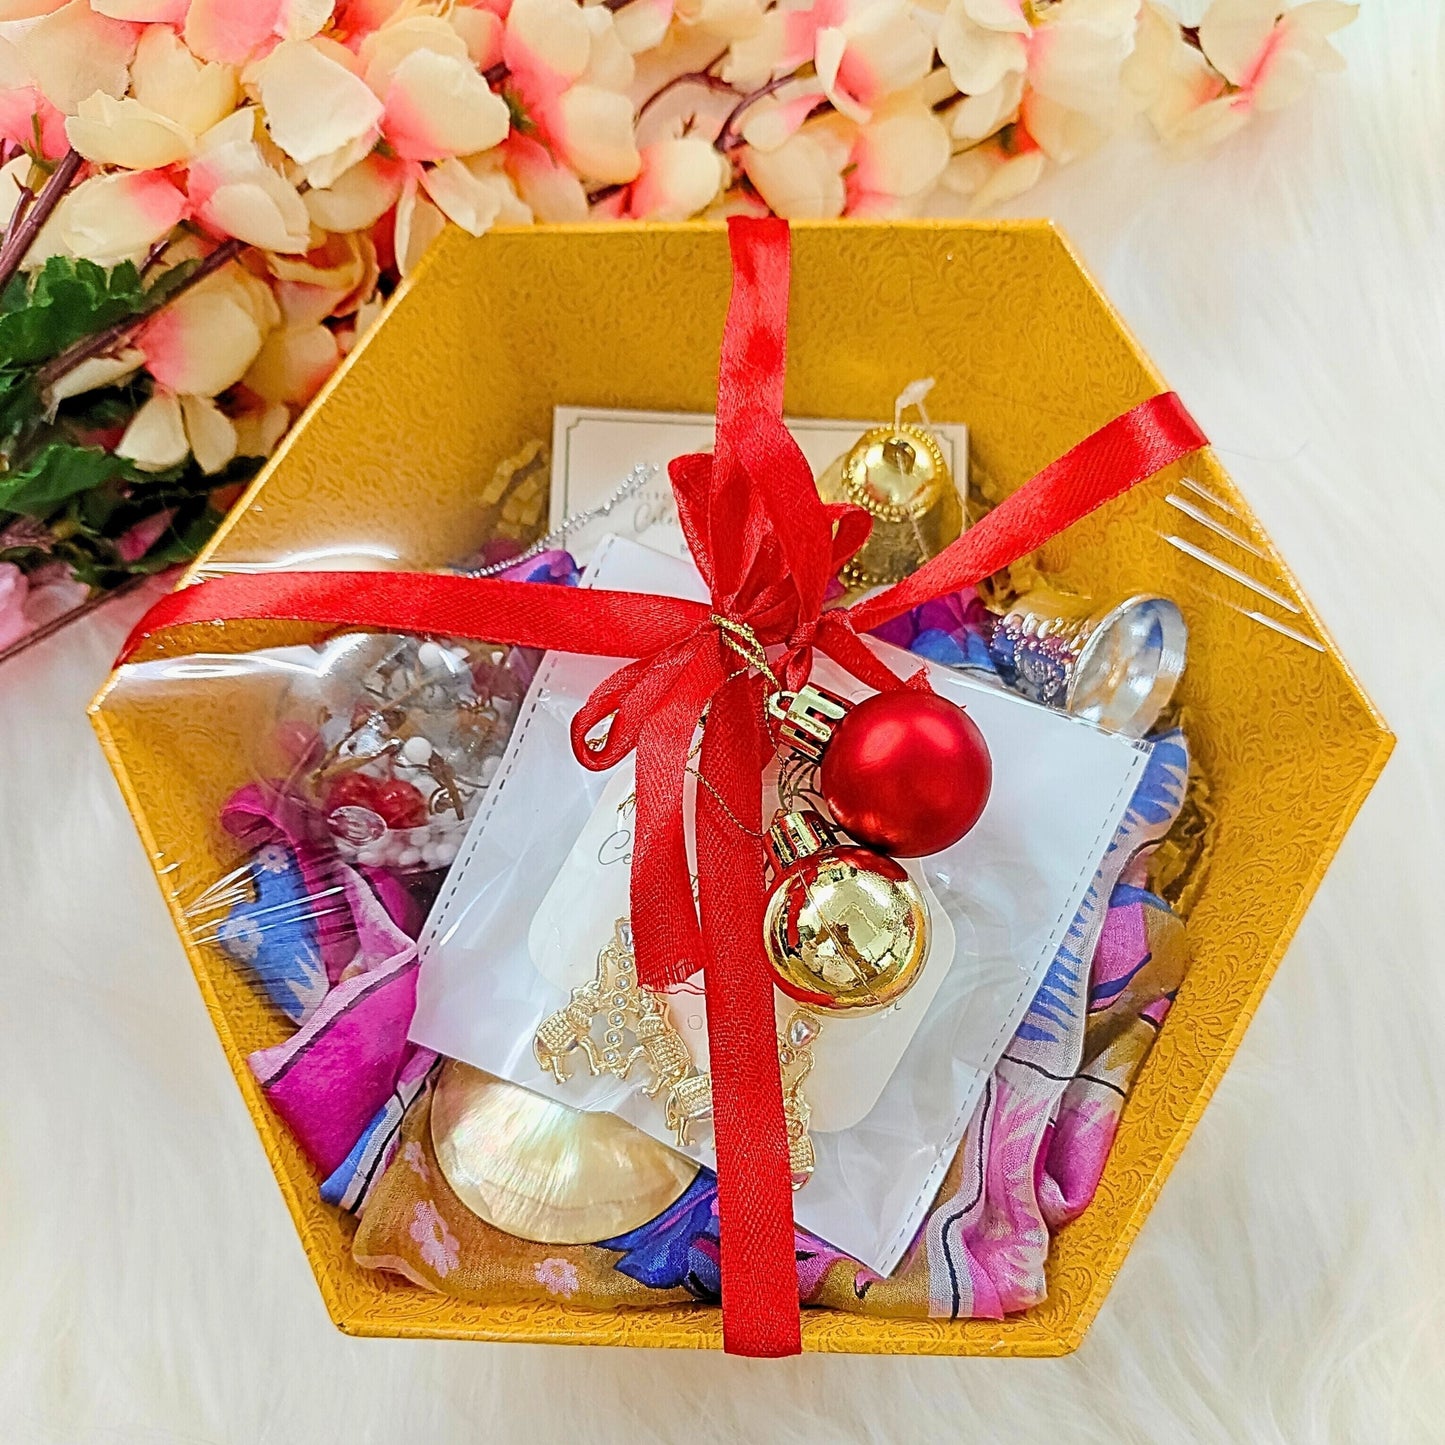 A Feel Good Hamper For Those You Are Grateful For!